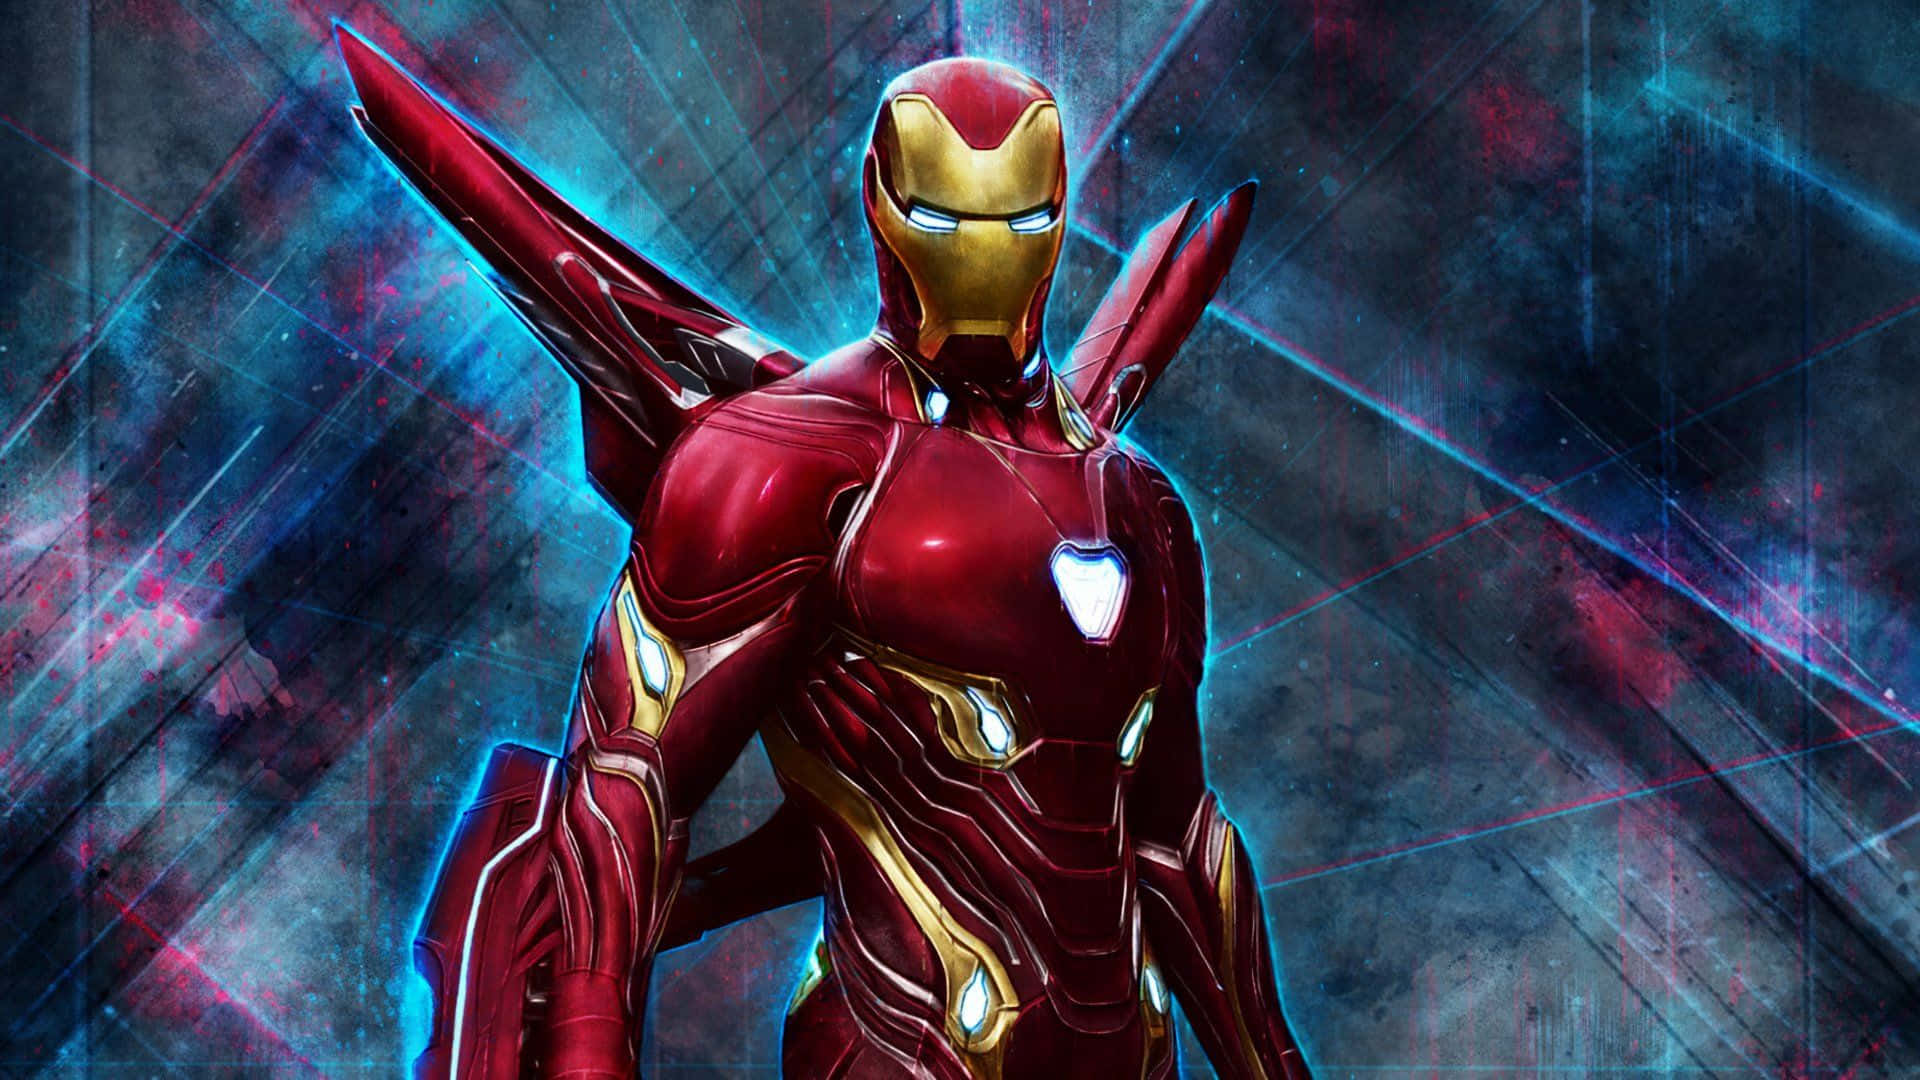 High Resolution Image  Iron Man, the Hero of the Avengers Unites to Defend the World Wallpaper